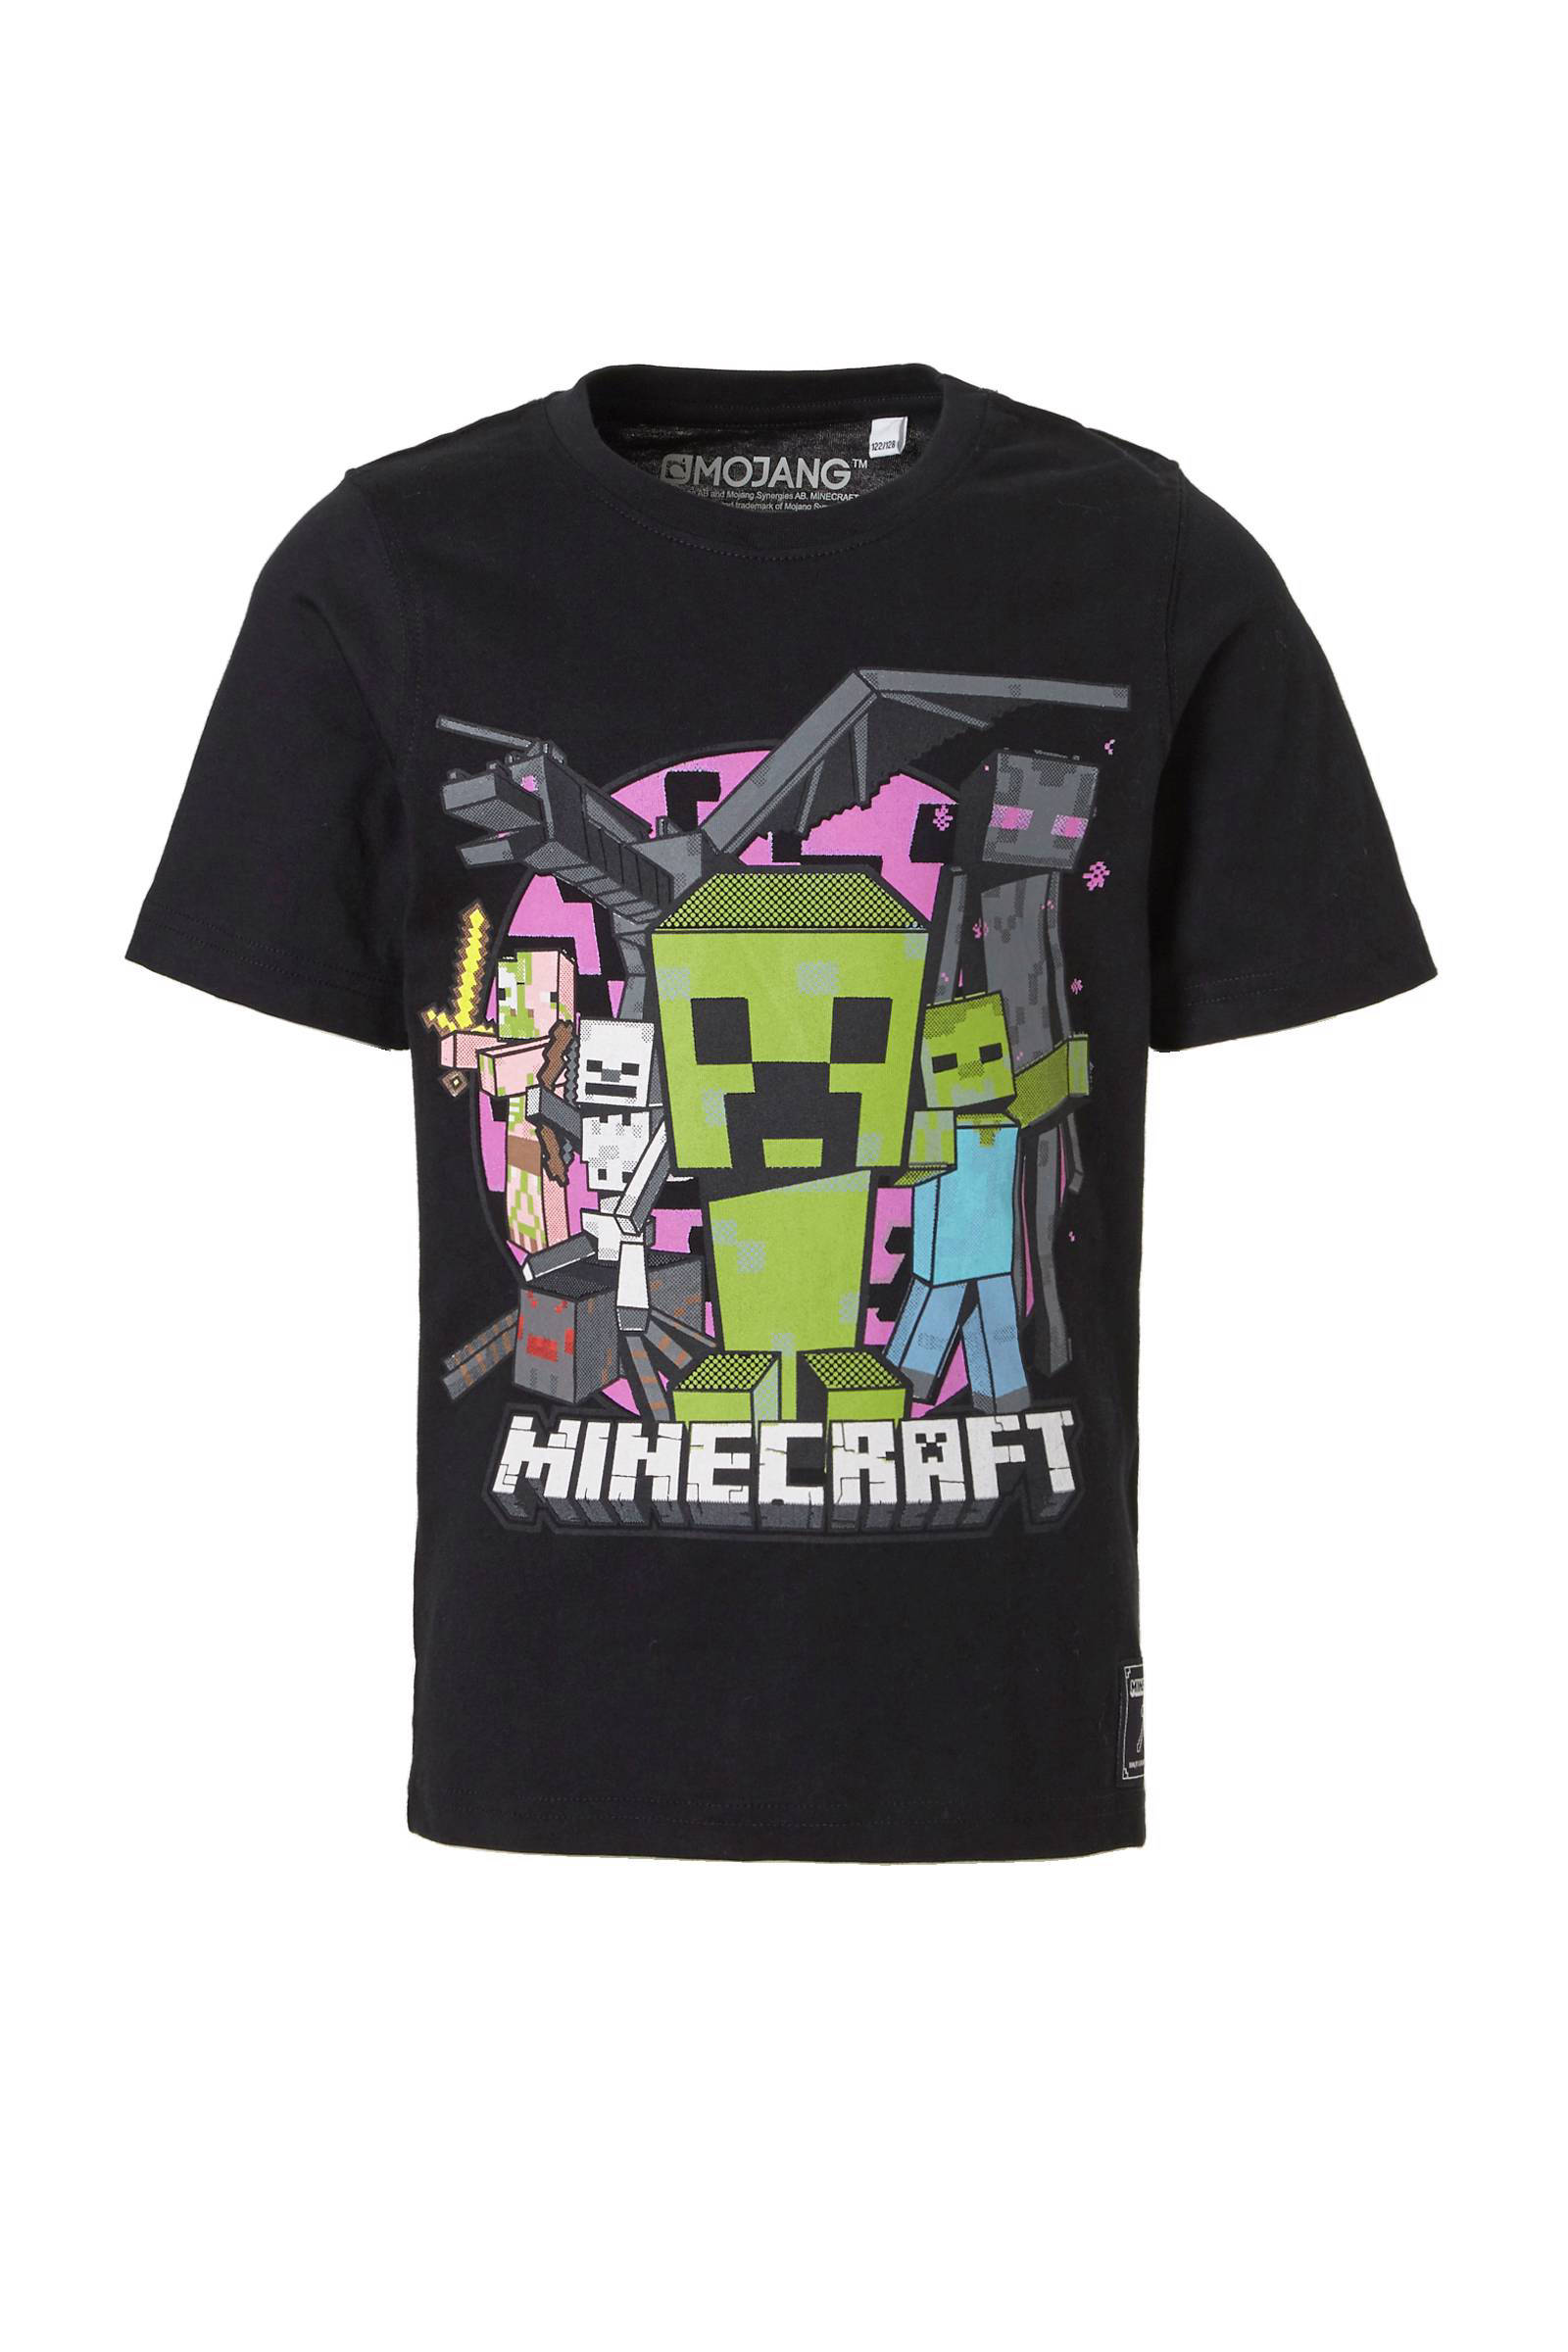 C A Here There Minecraft T Shirt Wehkamp